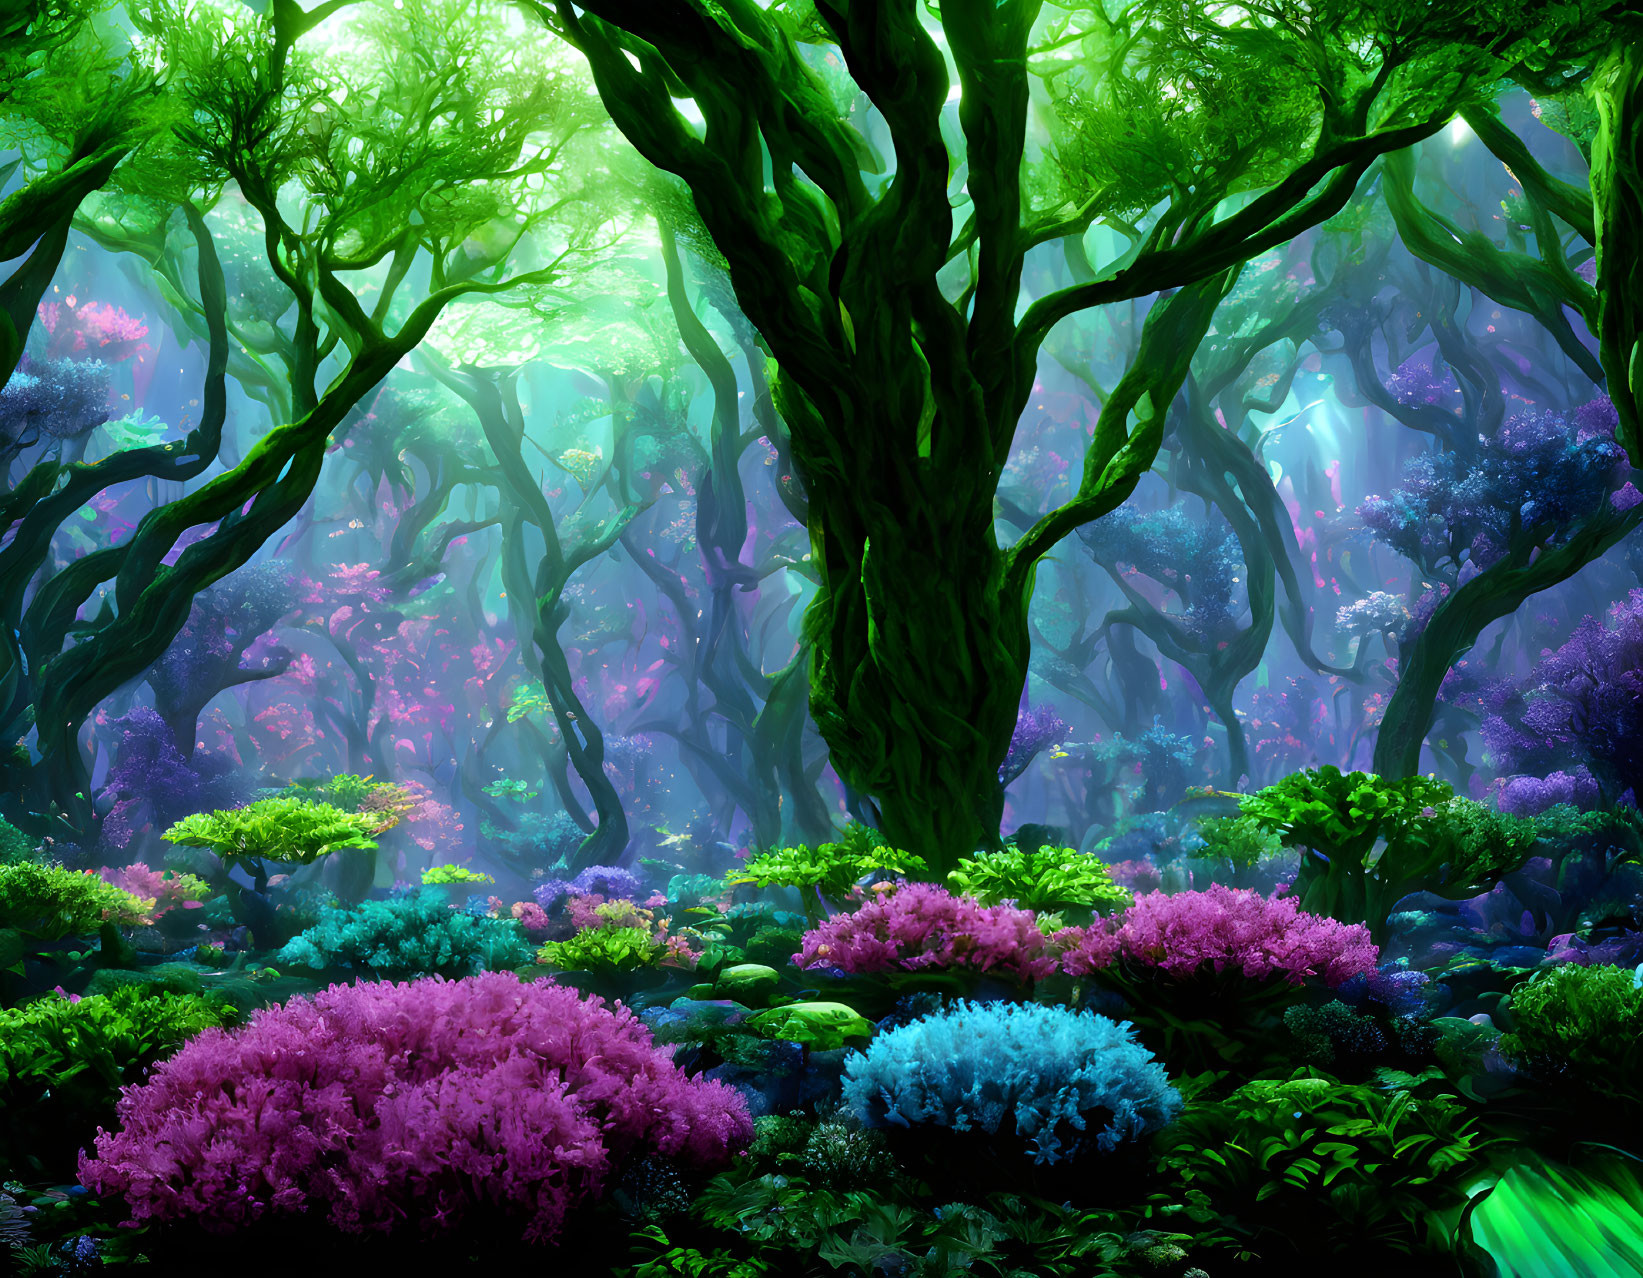 Vibrant forest with twisted green trees and colorful foliage under magical light